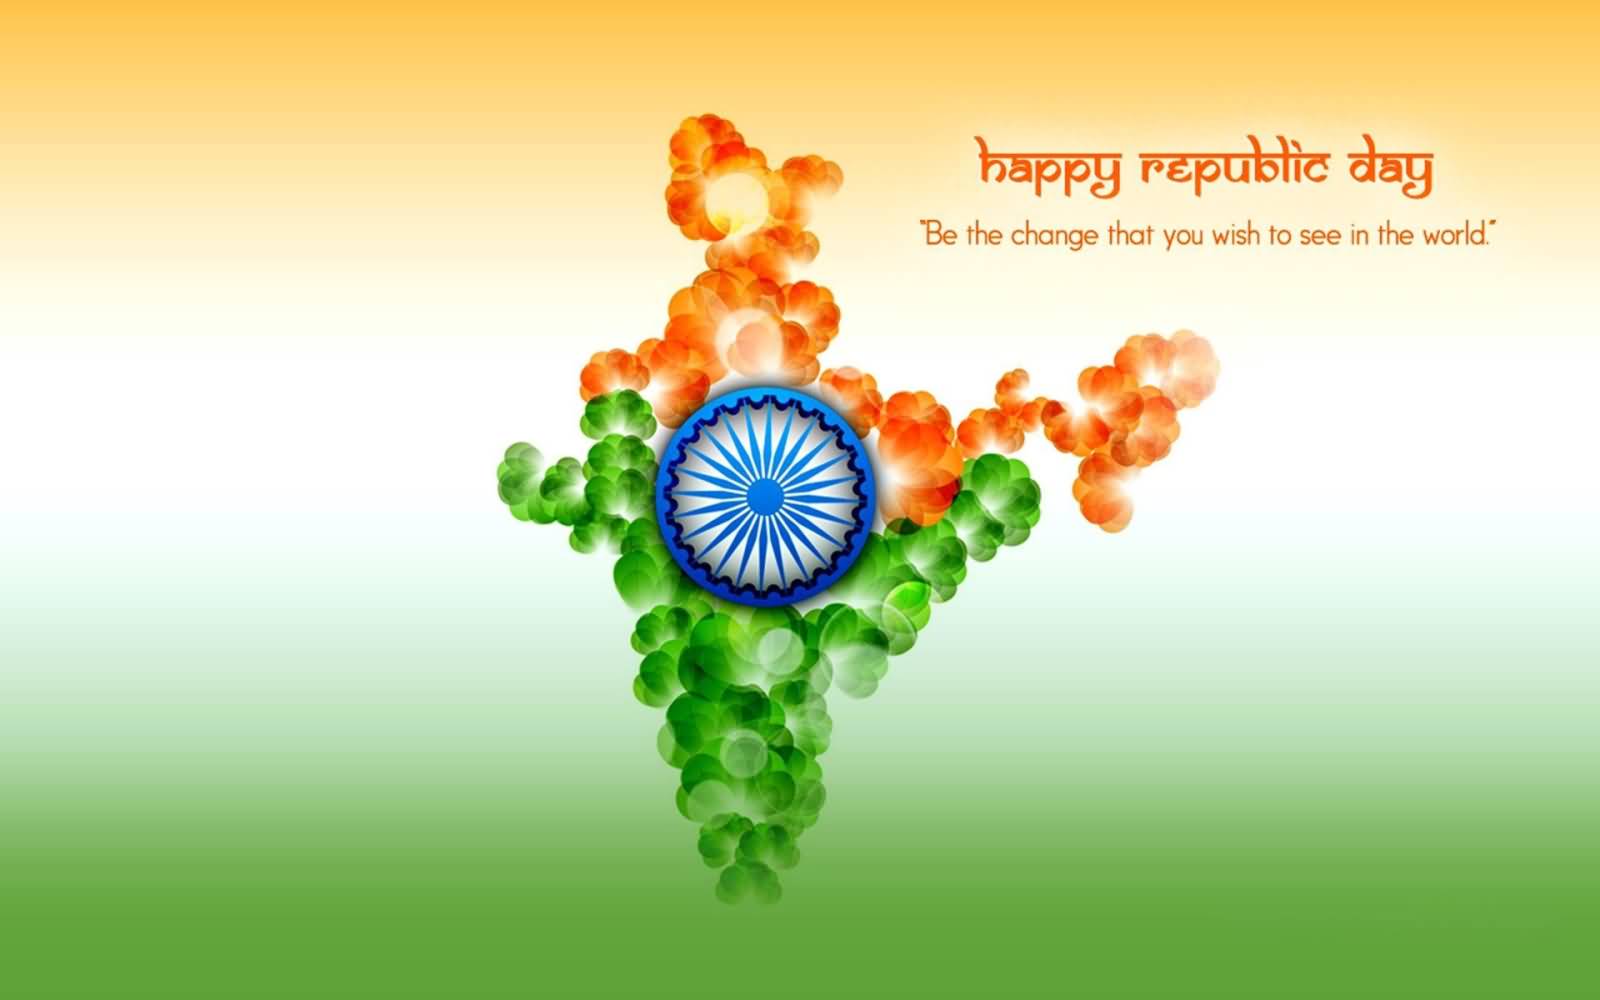 happy republic day be the change that you wish to see in the world